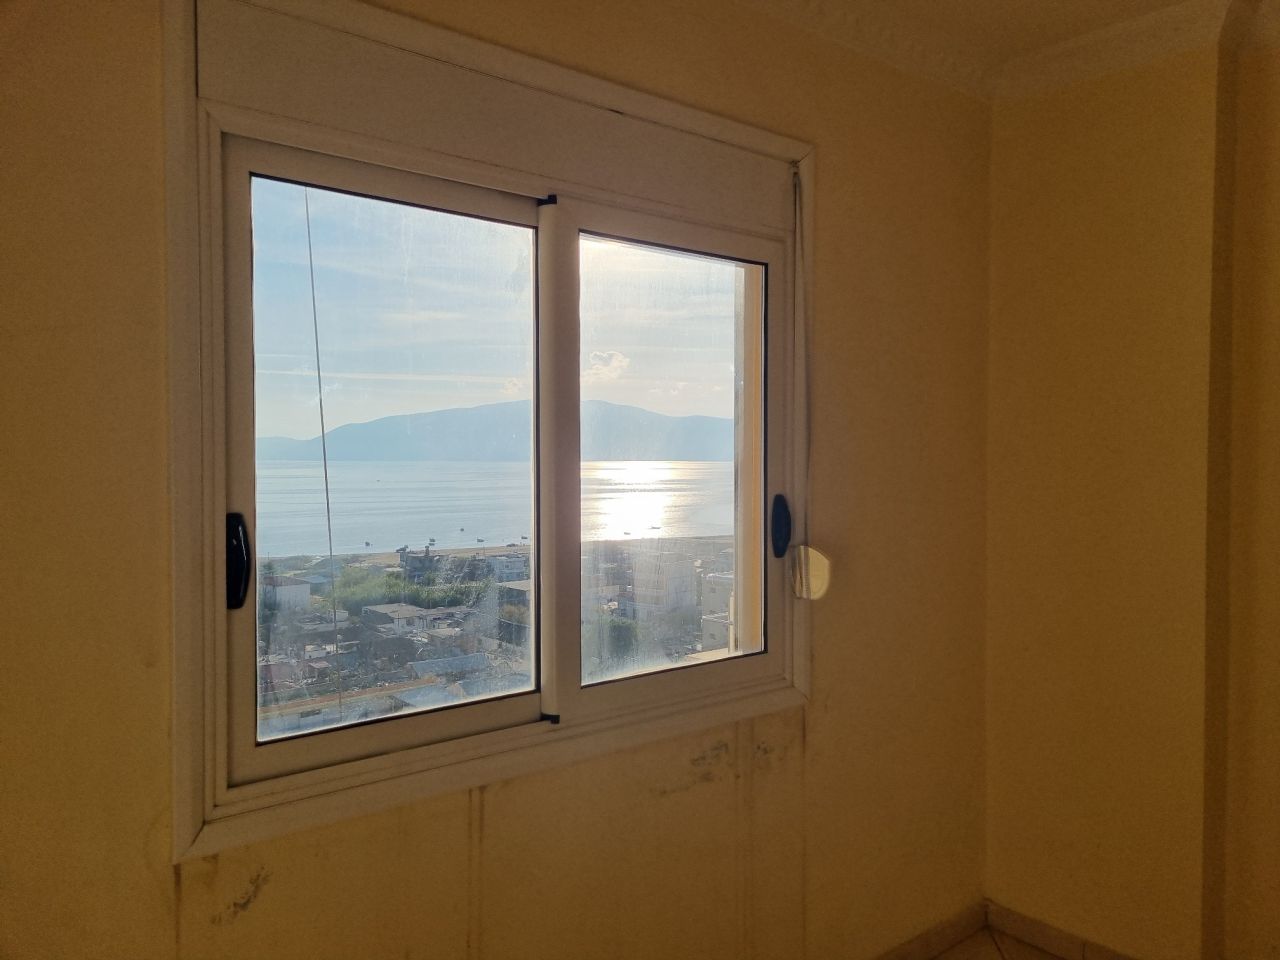 One Bedroom Apartment For Sale In Vlore, Albania with Sea View